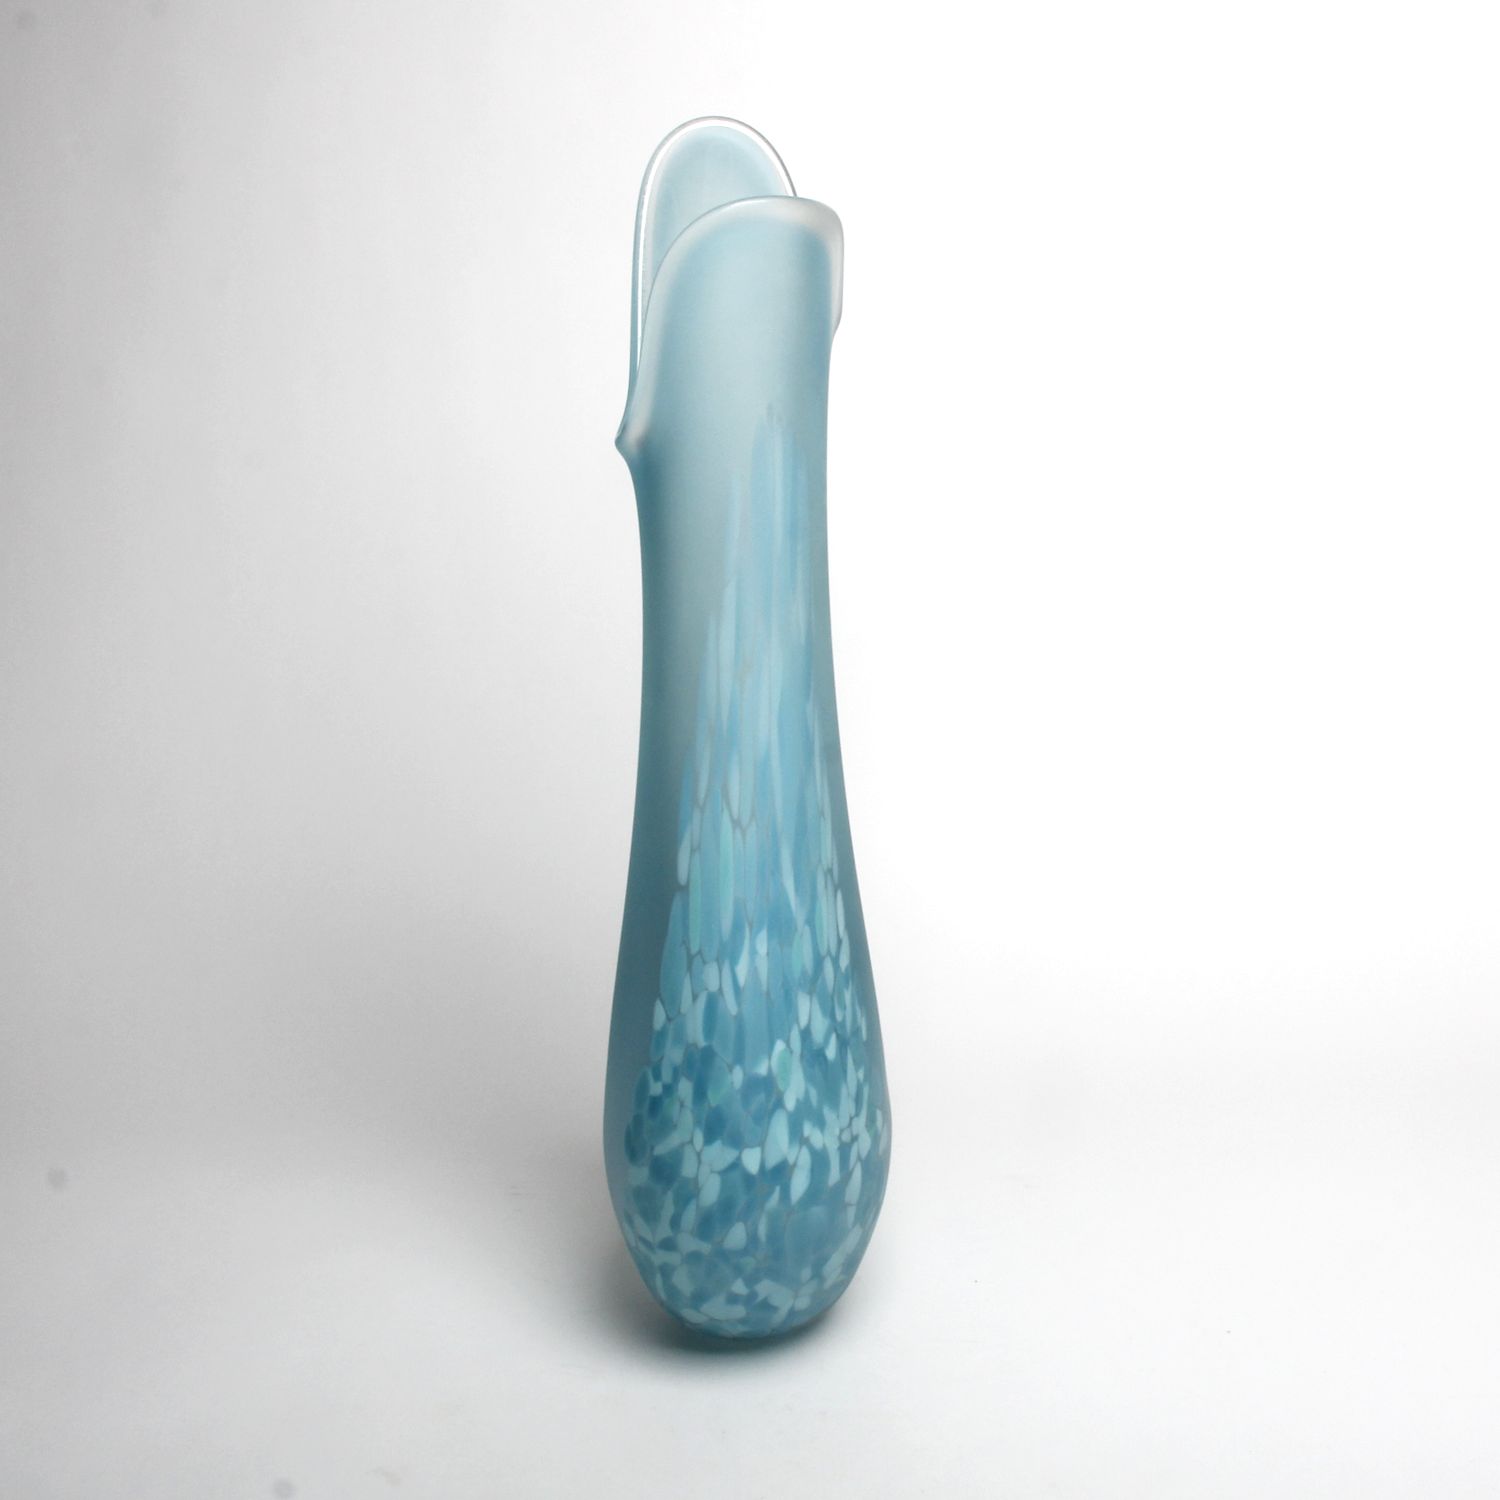 A&M Waddell Hunter: Large Flava Vase Product Image 2 of 6